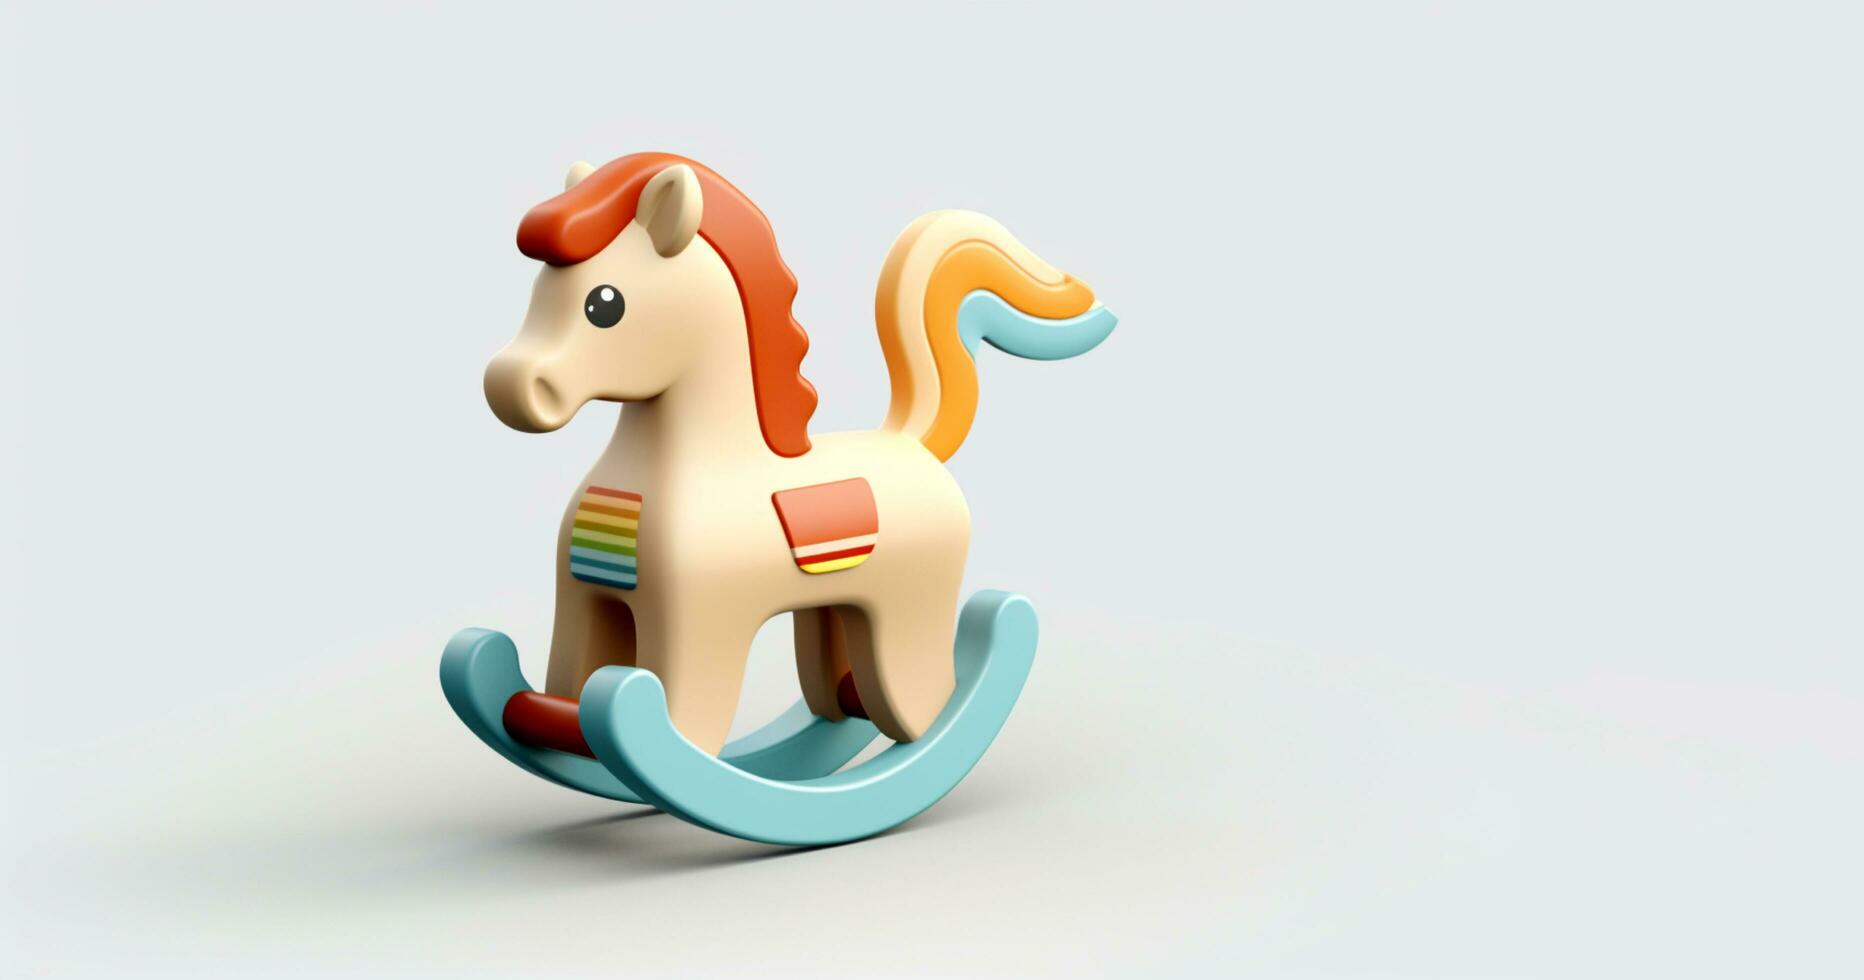 3d toy rocking horse is shown on a white background photo